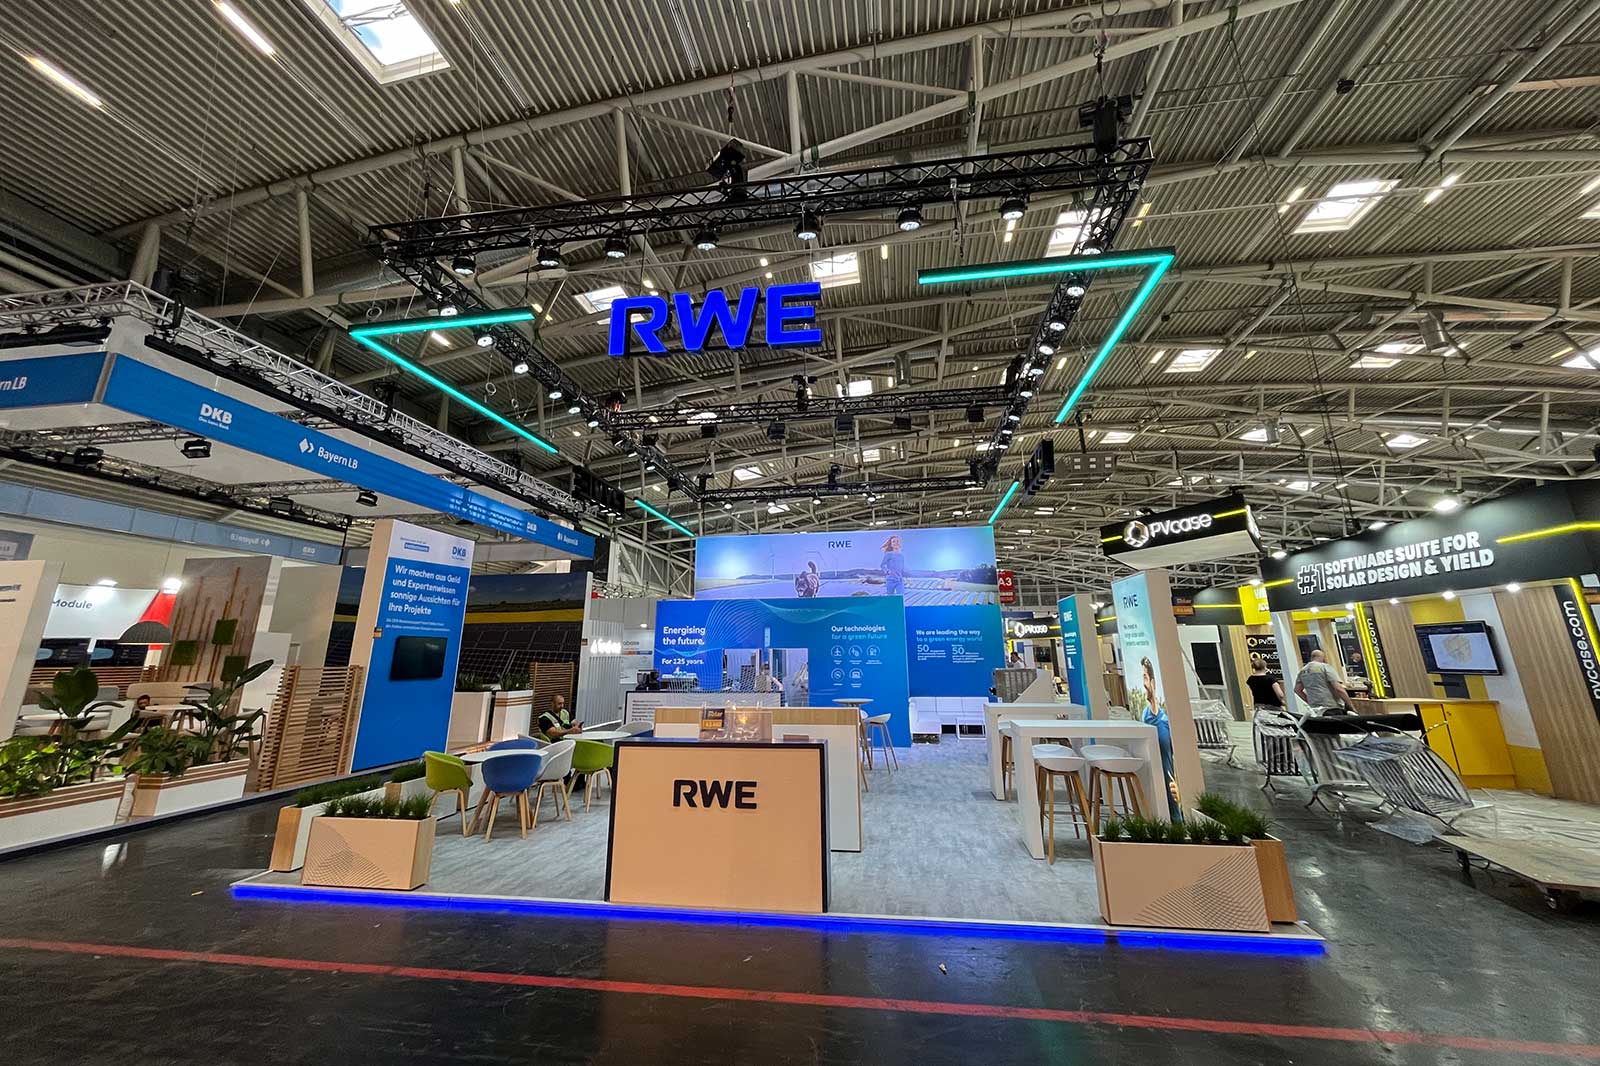 An RWE exhibition stand from the front.